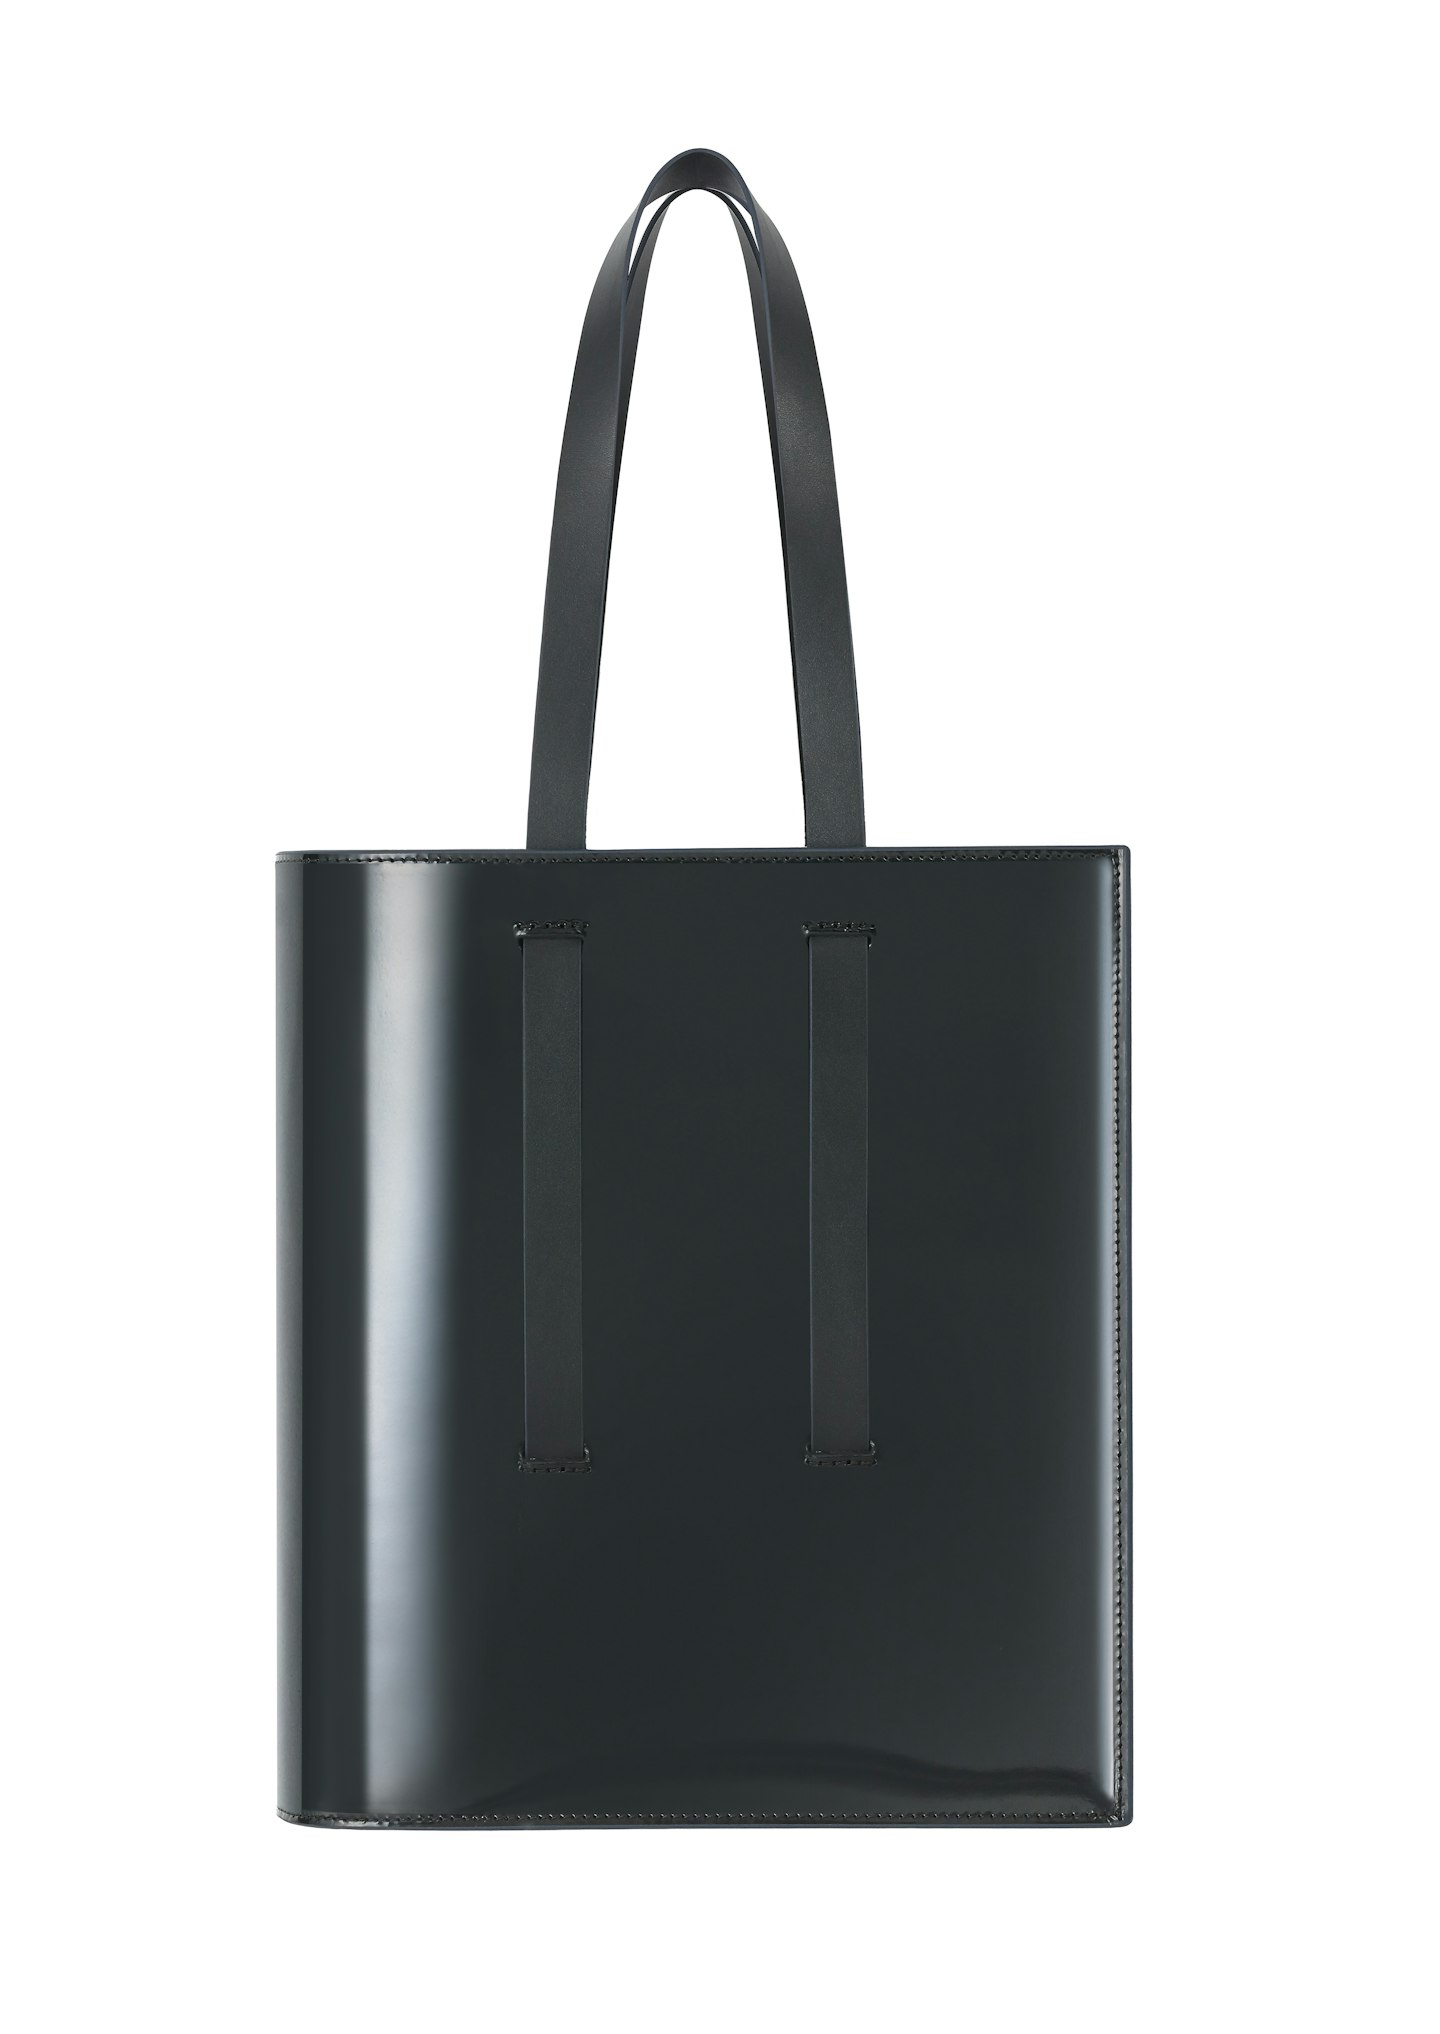 Leather Tote Bag, £159.90